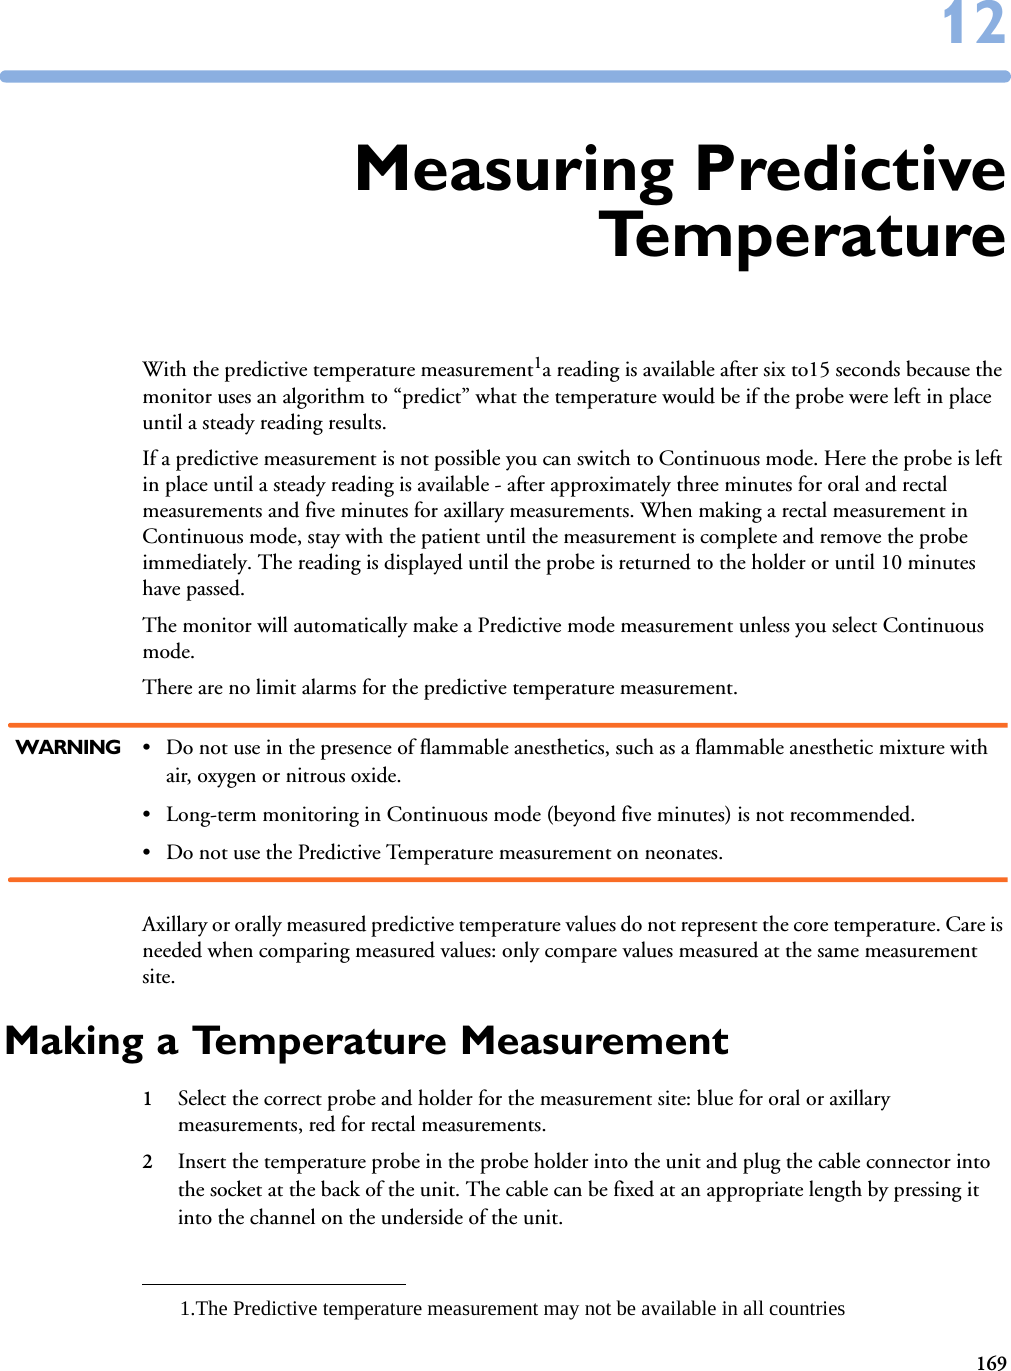 1691212Measuring PredictiveTe m p e r a t u r eWith the predictive temperature measurement1a reading is available after six to15 seconds because the monitor uses an algorithm to “predict” what the temperature would be if the probe were left in place until a steady reading results. If a predictive measurement is not possible you can switch to Continuous mode. Here the probe is left in place until a steady reading is available - after approximately three minutes for oral and rectal measurements and five minutes for axillary measurements. When making a rectal measurement in Continuous mode, stay with the patient until the measurement is complete and remove the probe immediately. The reading is displayed until the probe is returned to the holder or until 10 minutes have passed. The monitor will automatically make a Predictive mode measurement unless you select Continuous mode.There are no limit alarms for the predictive temperature measurement. WARNING • Do not use in the presence of flammable anesthetics, such as a flammable anesthetic mixture with air, oxygen or nitrous oxide.• Long-term monitoring in Continuous mode (beyond five minutes) is not recommended.• Do not use the Predictive Temperature measurement on neonates.Axillary or orally measured predictive temperature values do not represent the core temperature. Care is needed when comparing measured values: only compare values measured at the same measurement site.Making a Temperature Measurement1Select the correct probe and holder for the measurement site: blue for oral or axillary measurements, red for rectal measurements.2Insert the temperature probe in the probe holder into the unit and plug the cable connector into the socket at the back of the unit. The cable can be fixed at an appropriate length by pressing it into the channel on the underside of the unit. 1.The Predictive temperature measurement may not be available in all countries